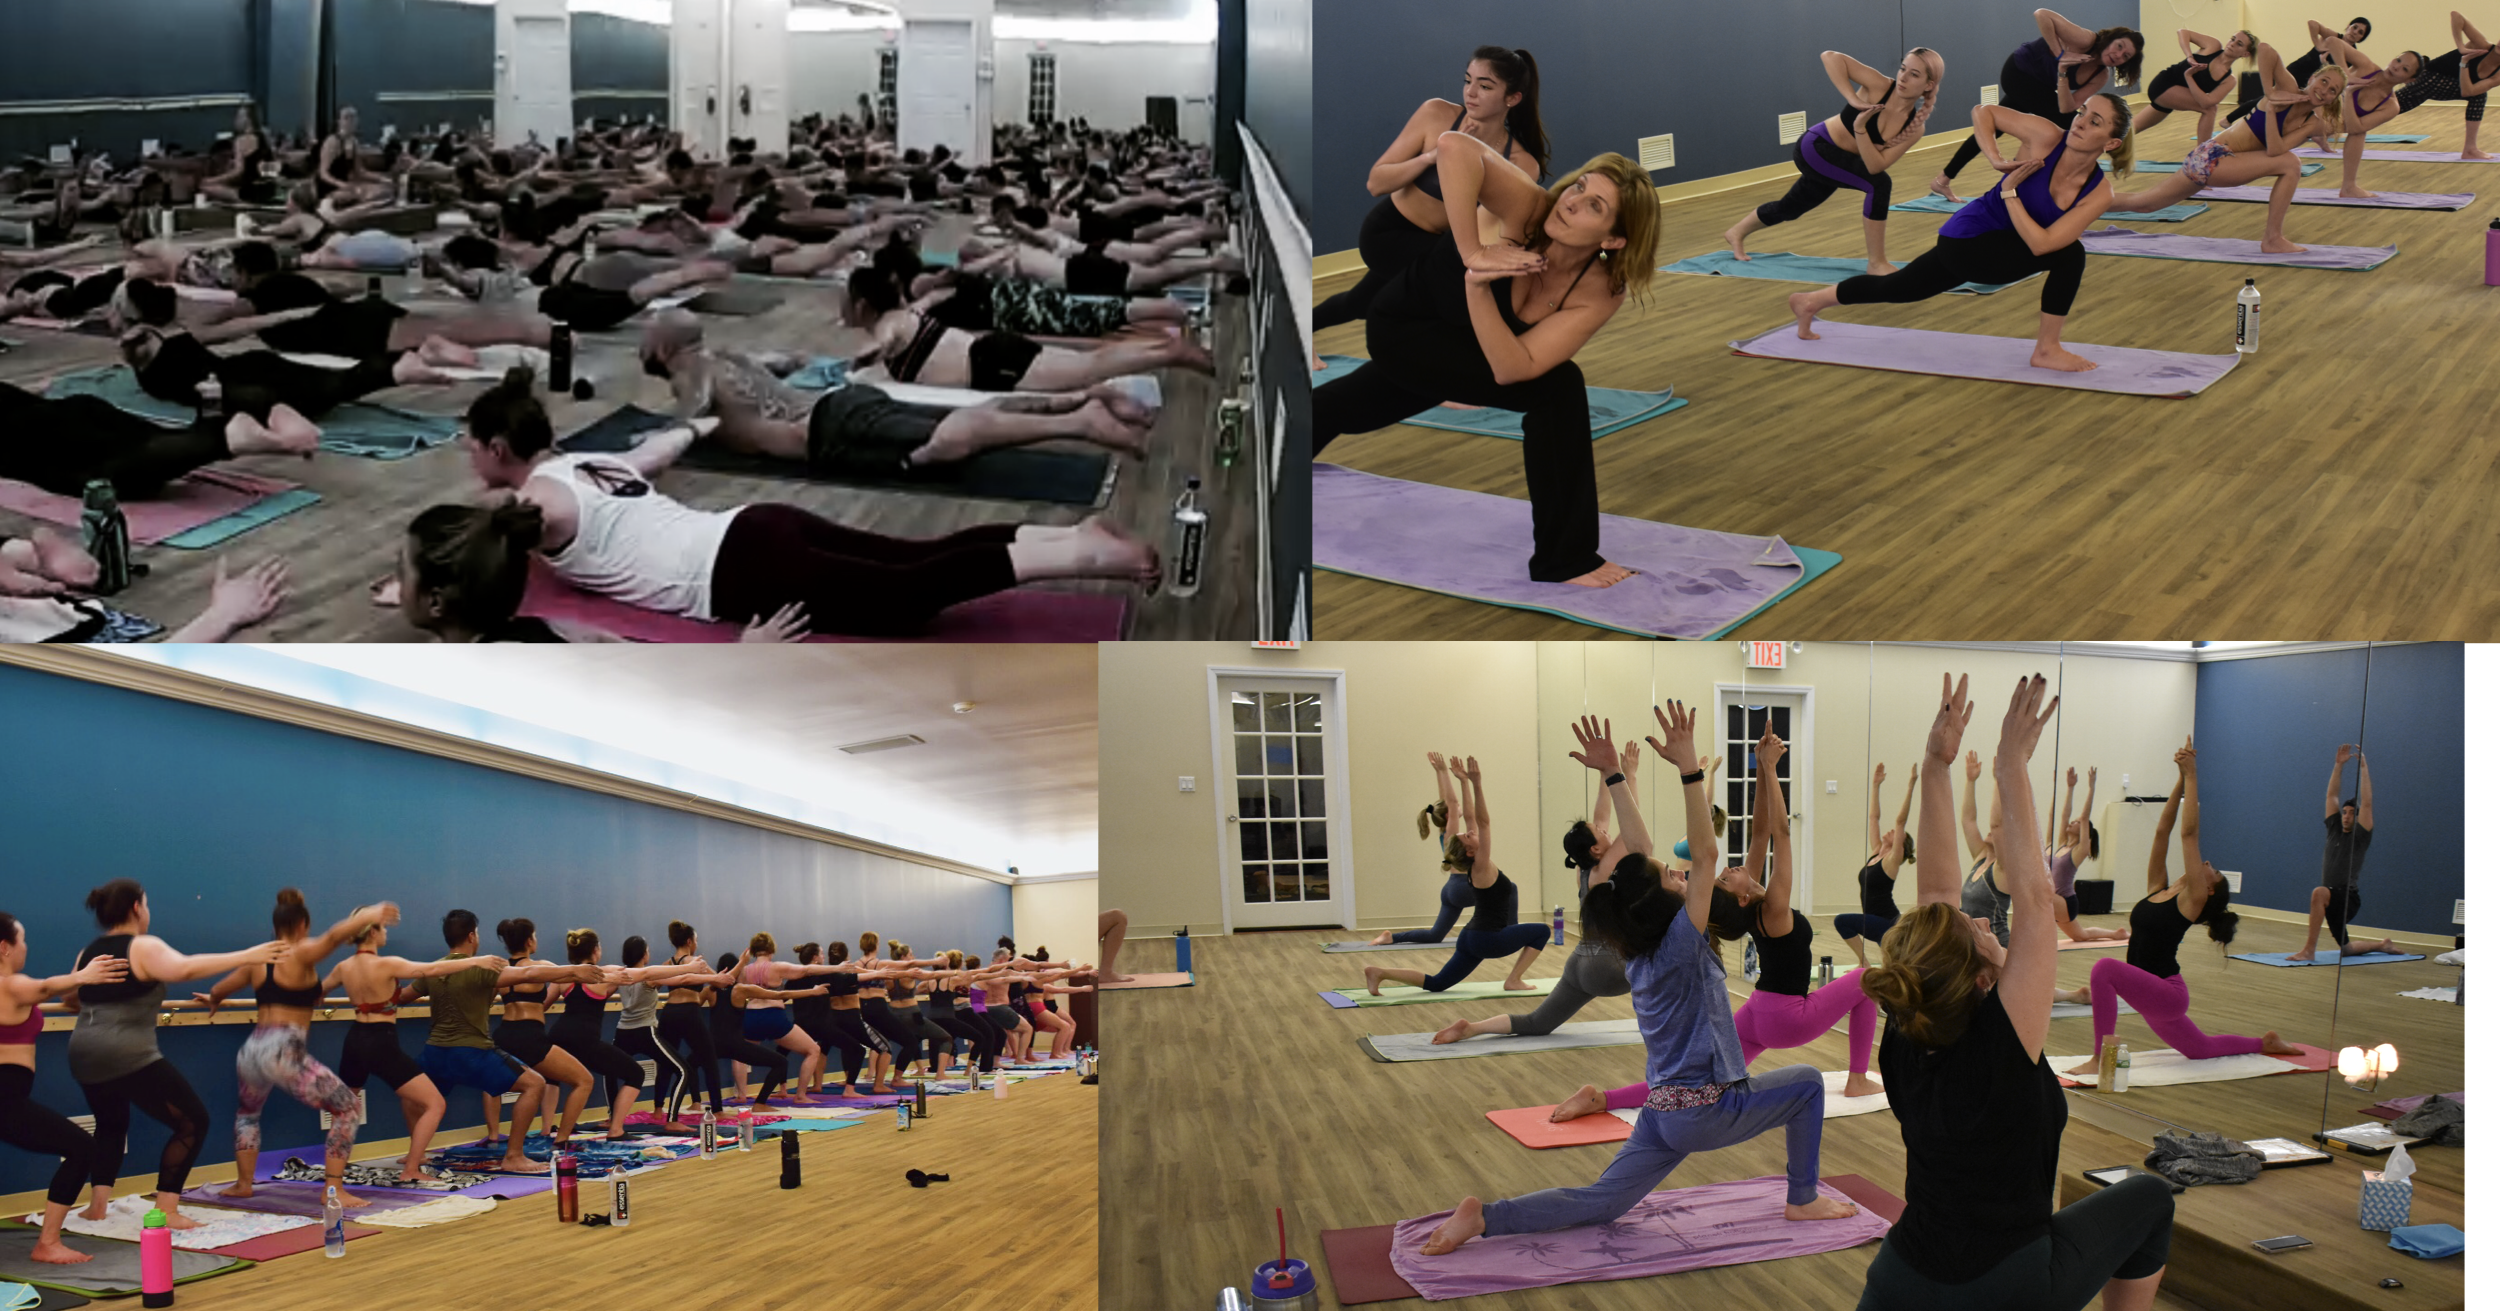   Our Classes   Hot Yoga! Hot HIIT! Hot Barre!   Learn More  